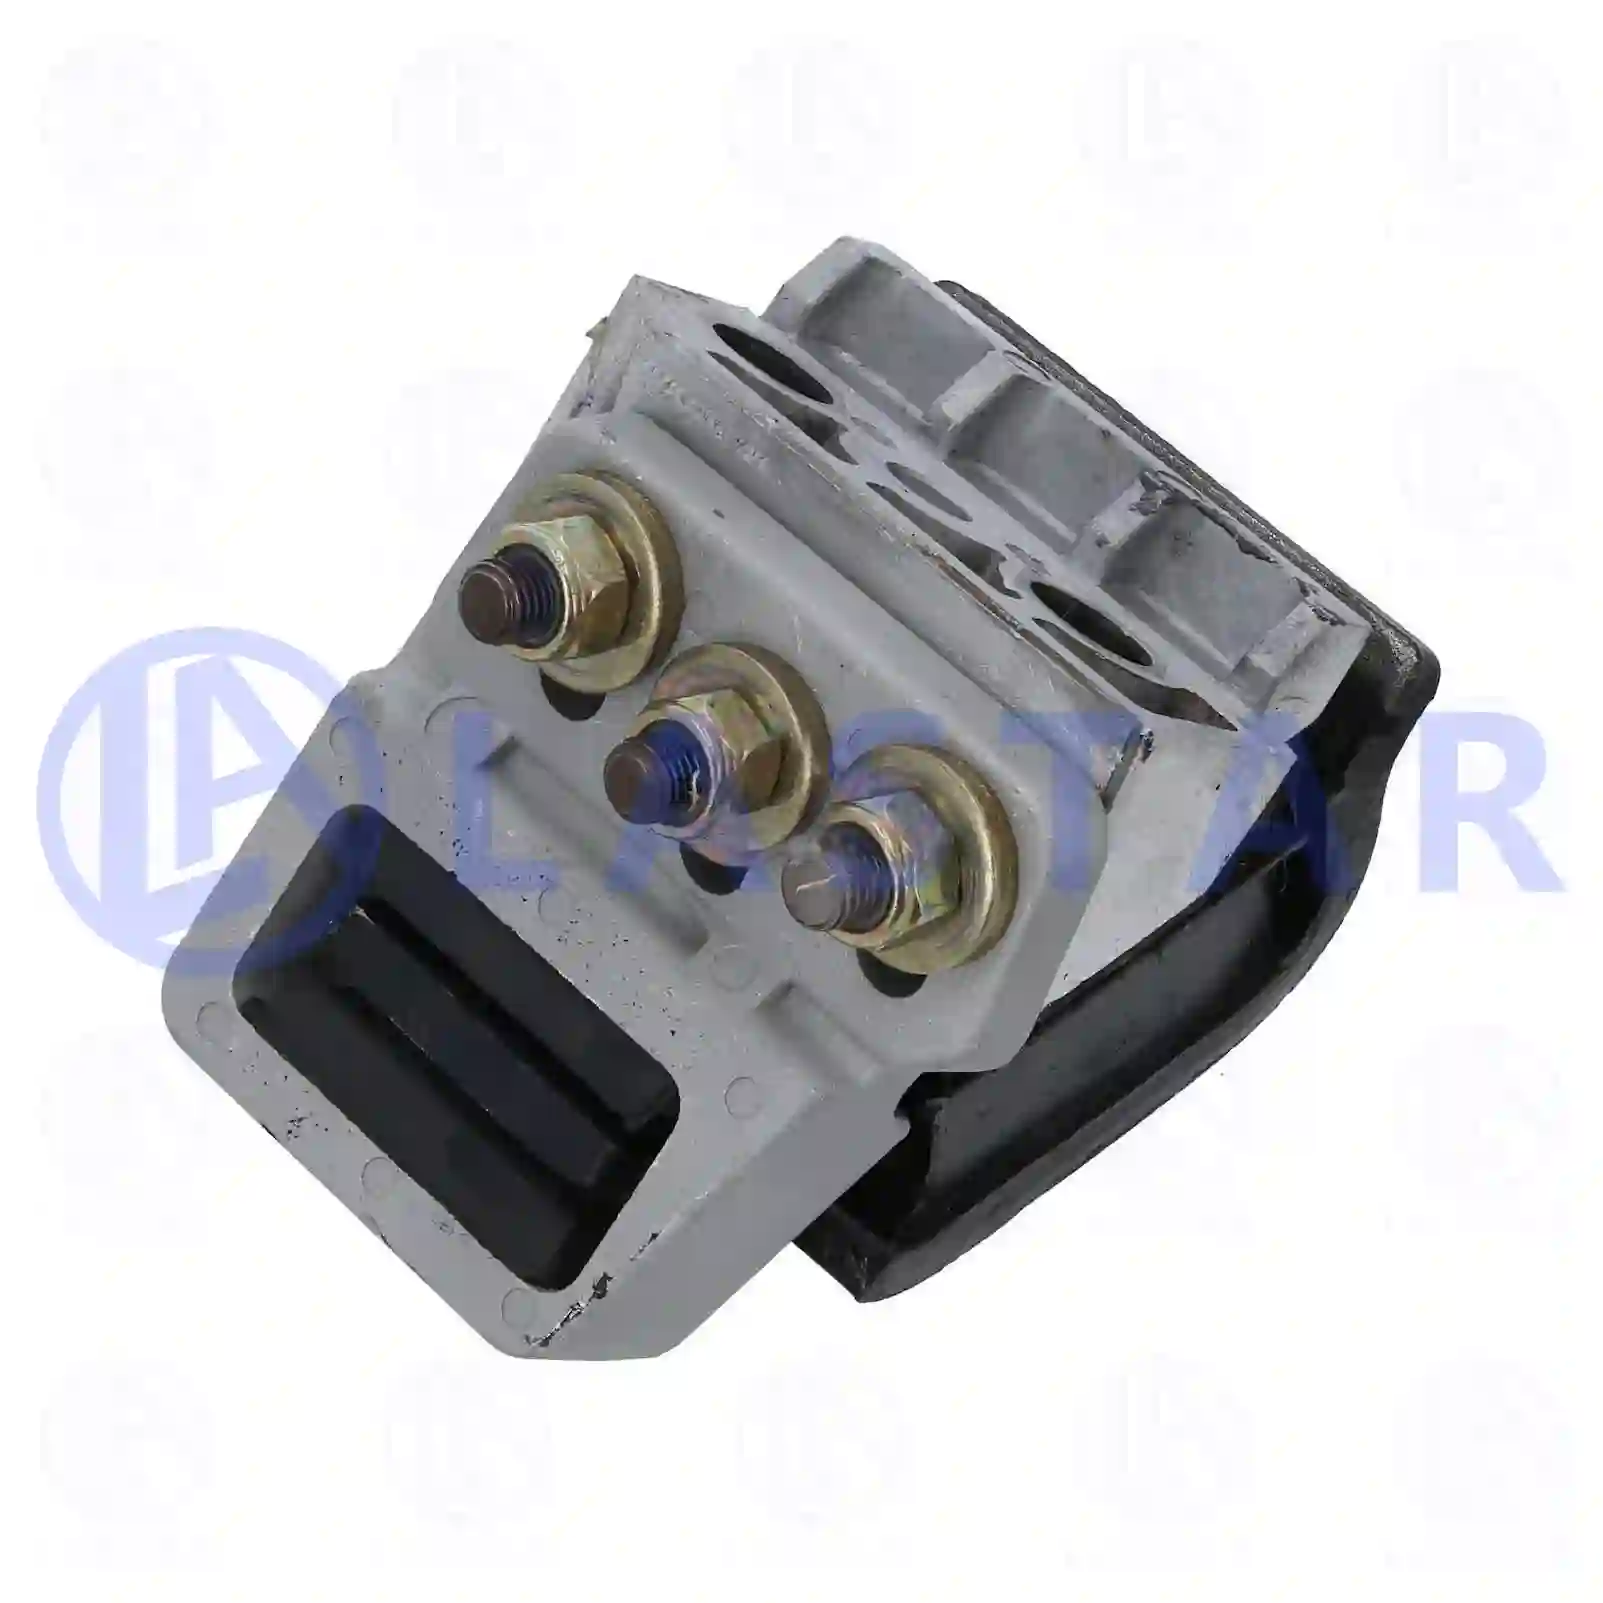 Engine mounting, 77702386, 6172400217, 6172400317, ||  77702386 Lastar Spare Part | Truck Spare Parts, Auotomotive Spare Parts Engine mounting, 77702386, 6172400217, 6172400317, ||  77702386 Lastar Spare Part | Truck Spare Parts, Auotomotive Spare Parts